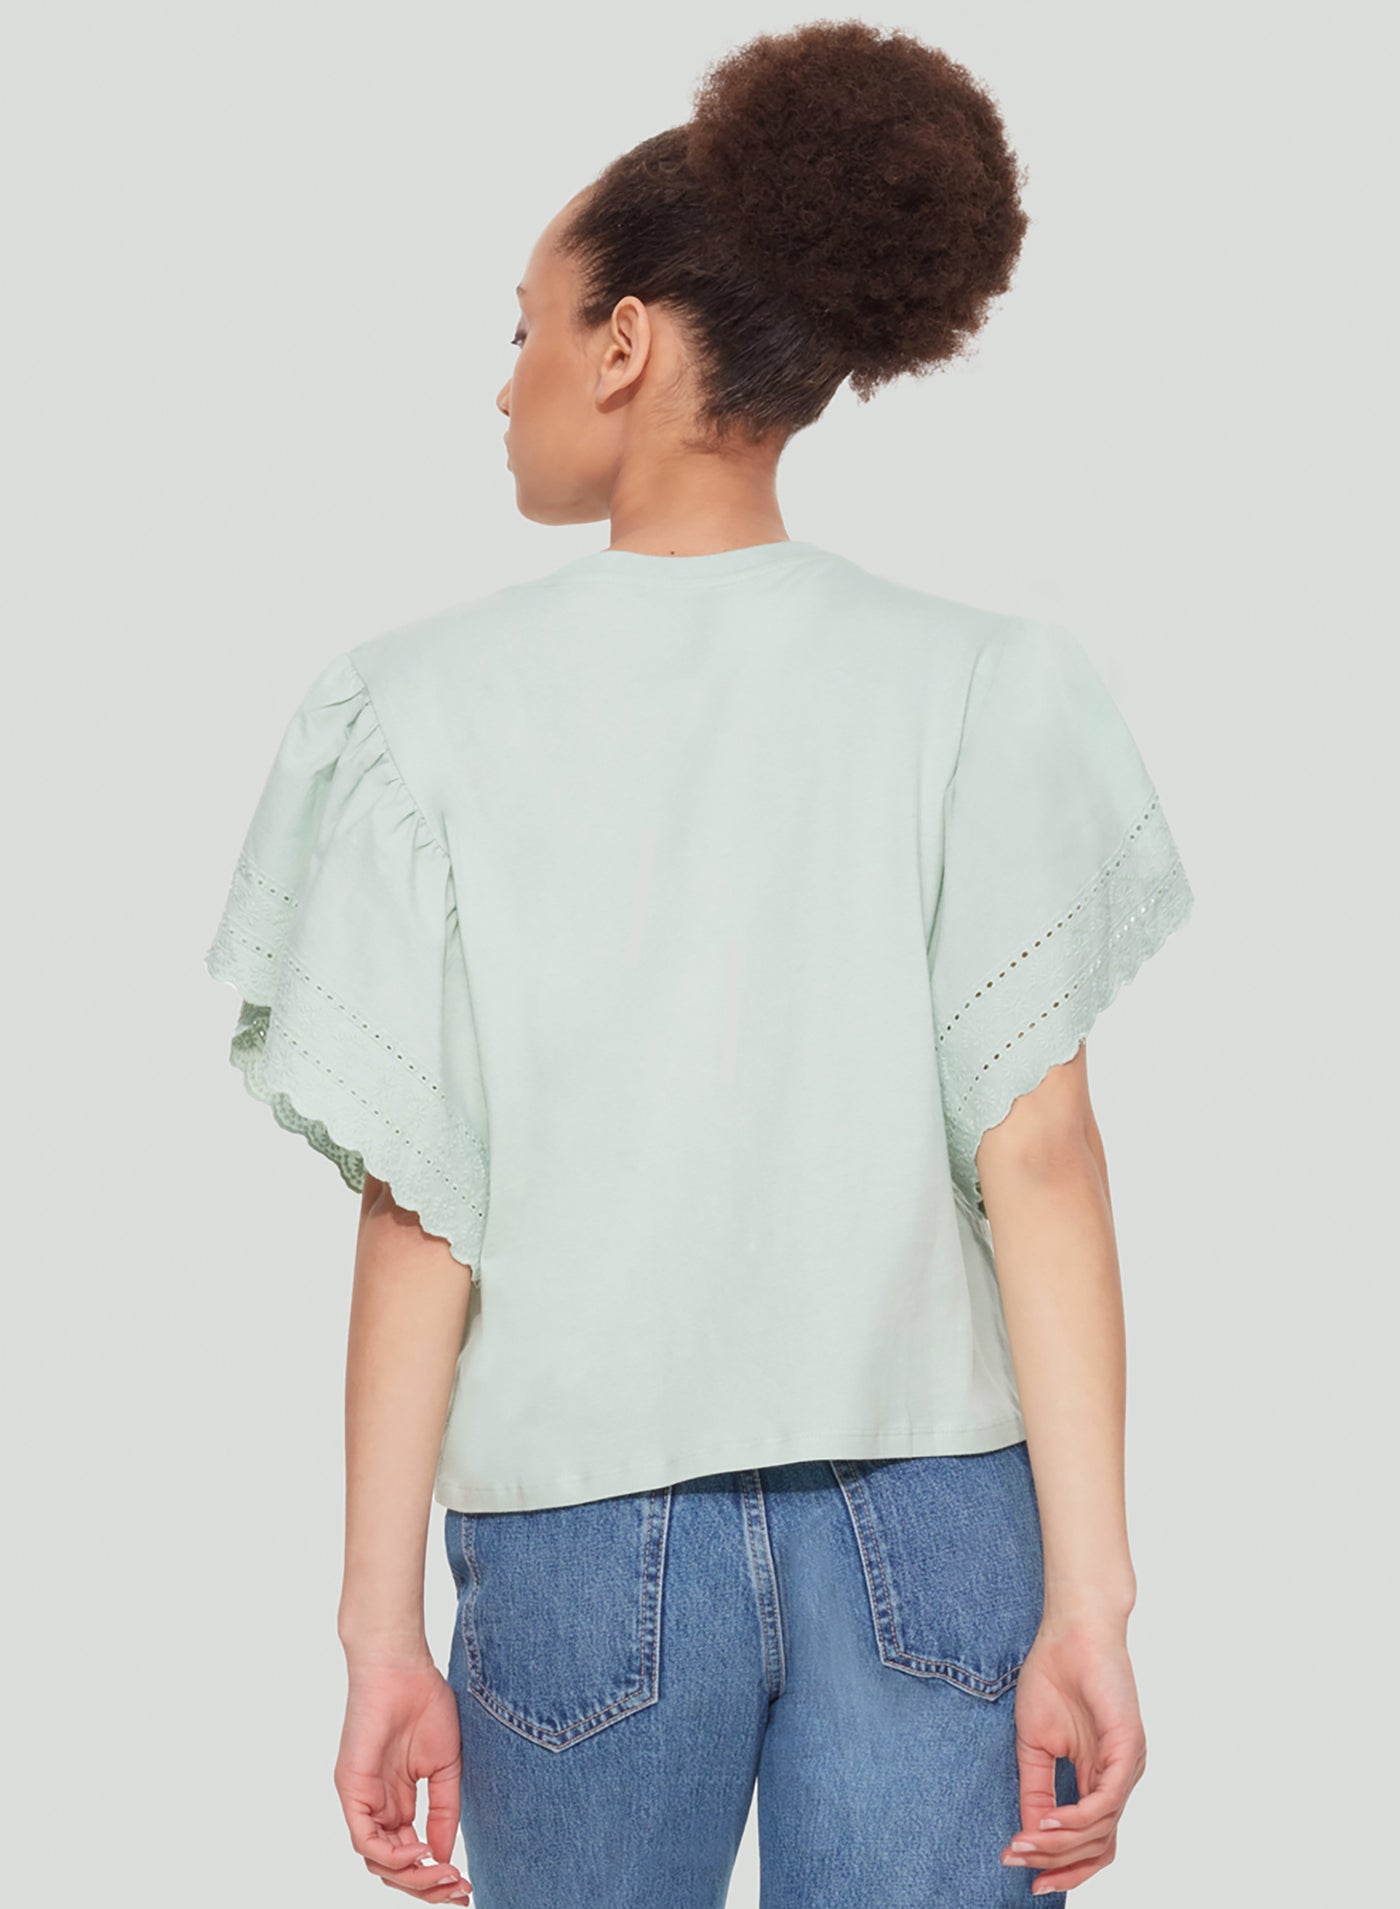 Embroidered Top | Seafoam Green  (XS-XL)